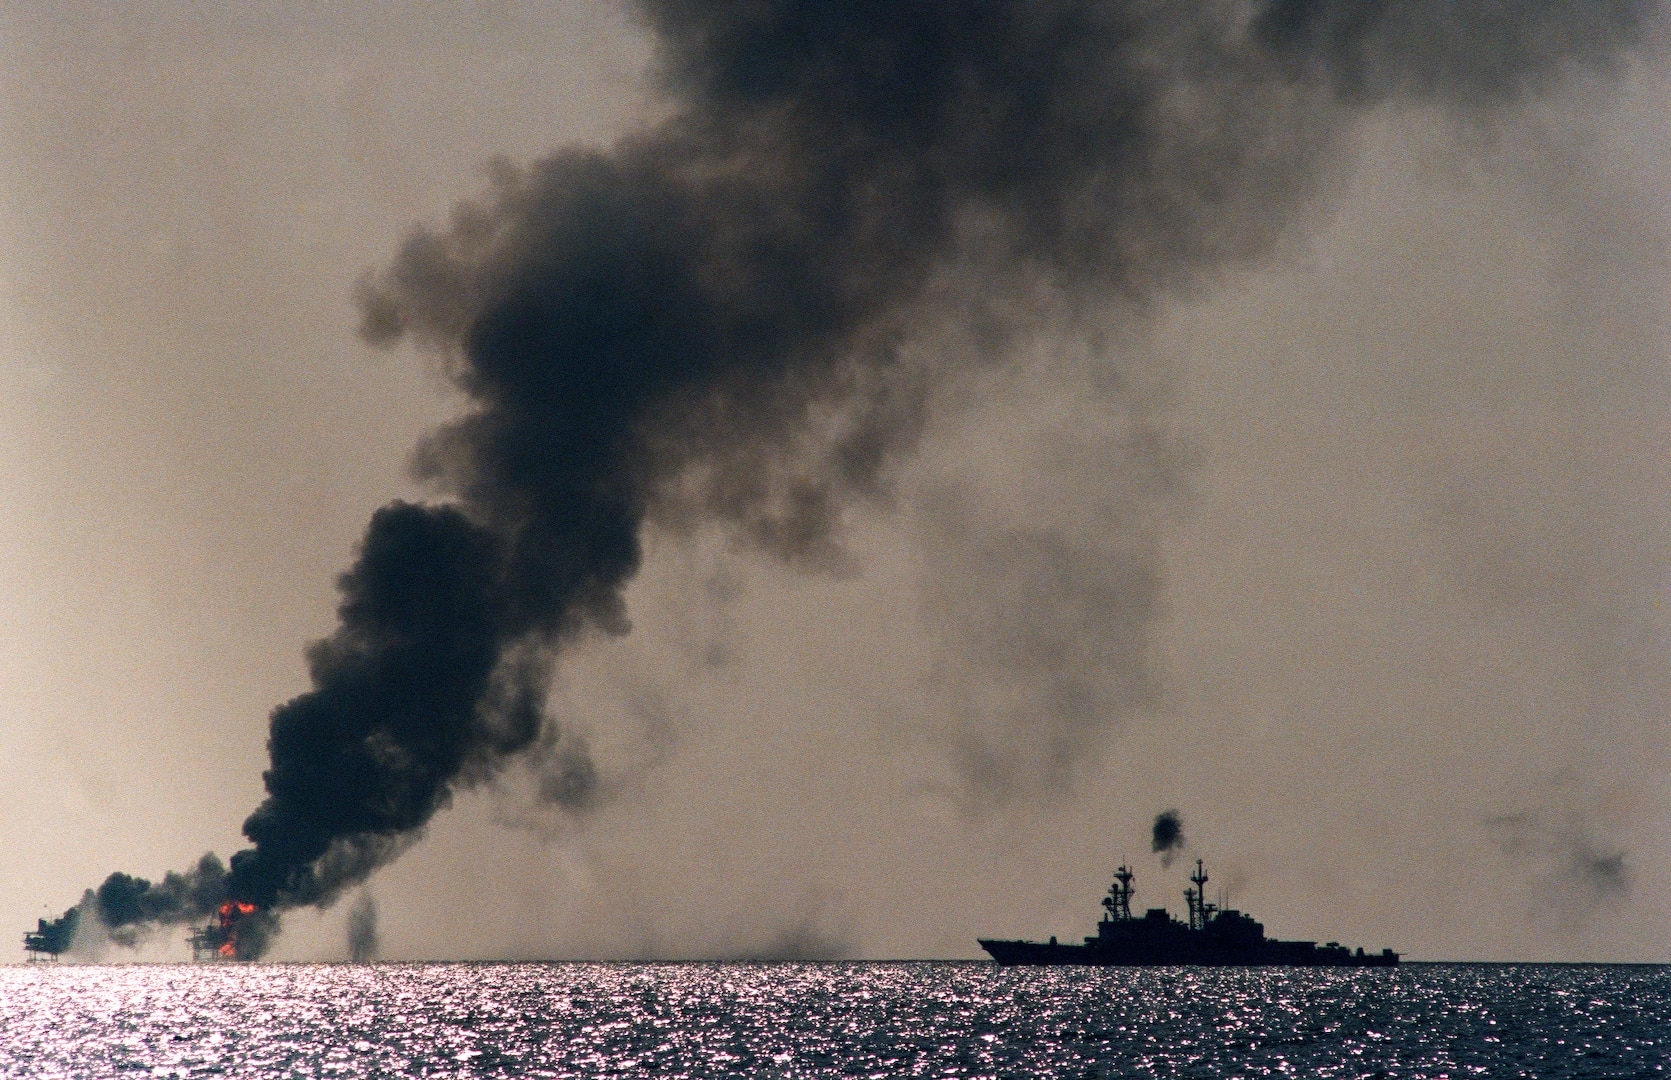 USS John Young shells two Iranian command and control platforms in response to recent Iranian missile attack on reflagged Kuwaiti super tanker, October 19, 1987 (U.S. Navy/National Archives and Records Administration)